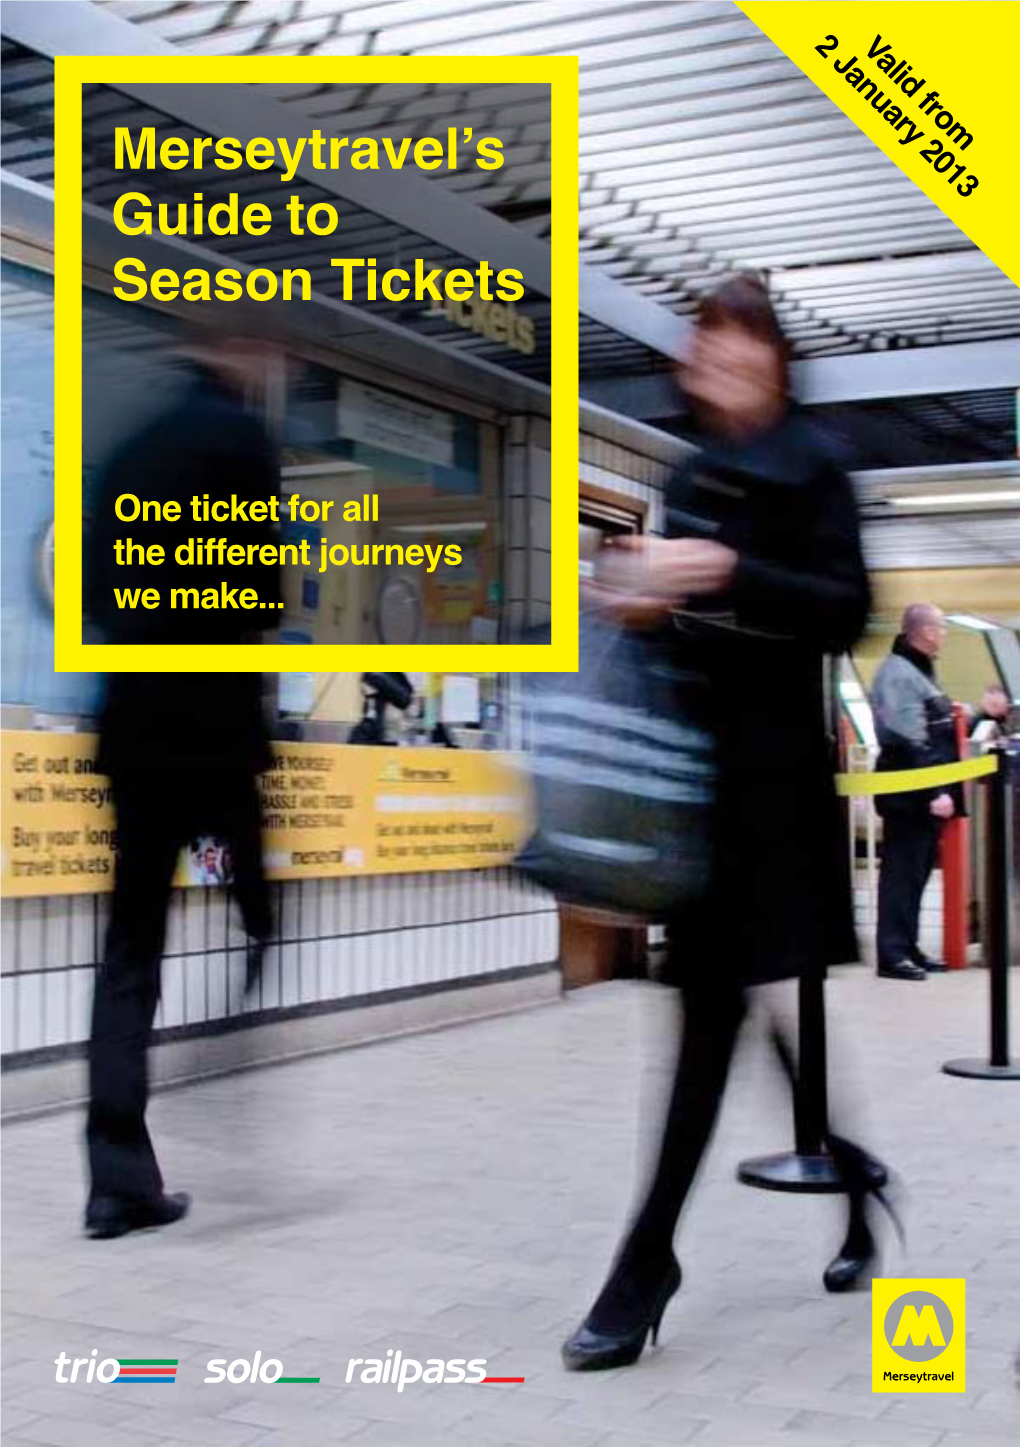 Merseytravel's Guide to Season Tickets